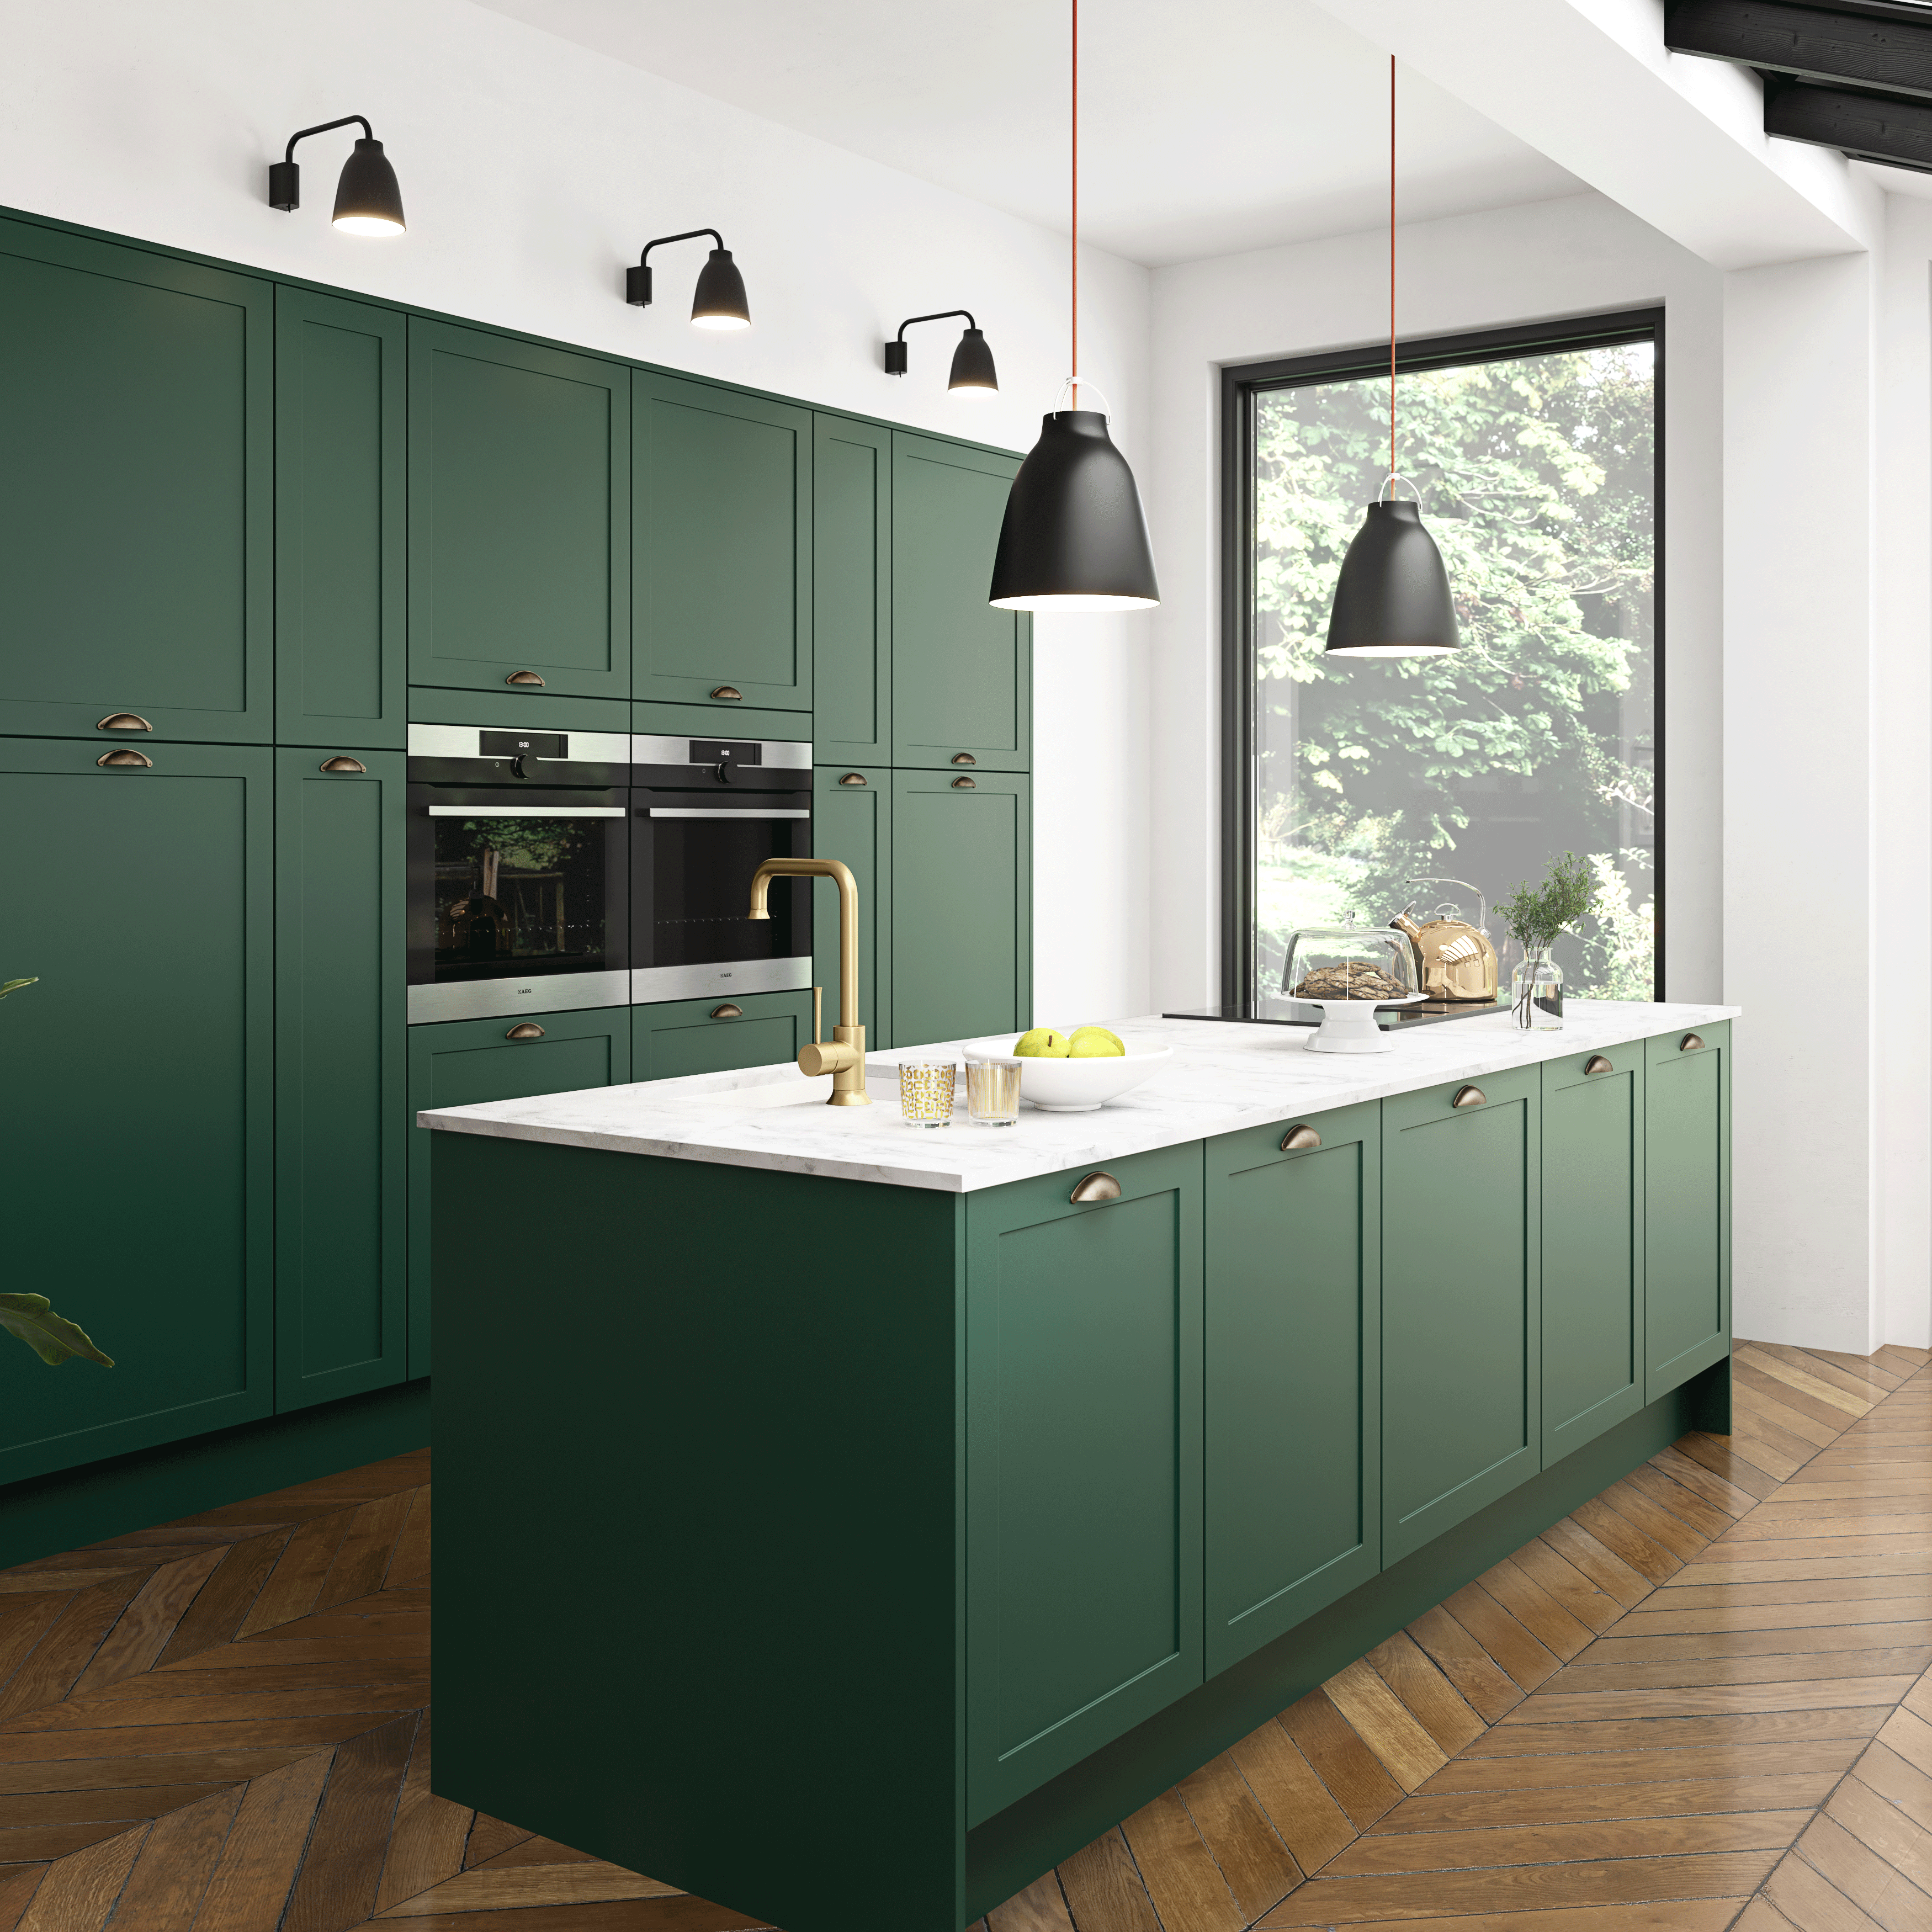 kitchen with green colour furniture and wooden flooring